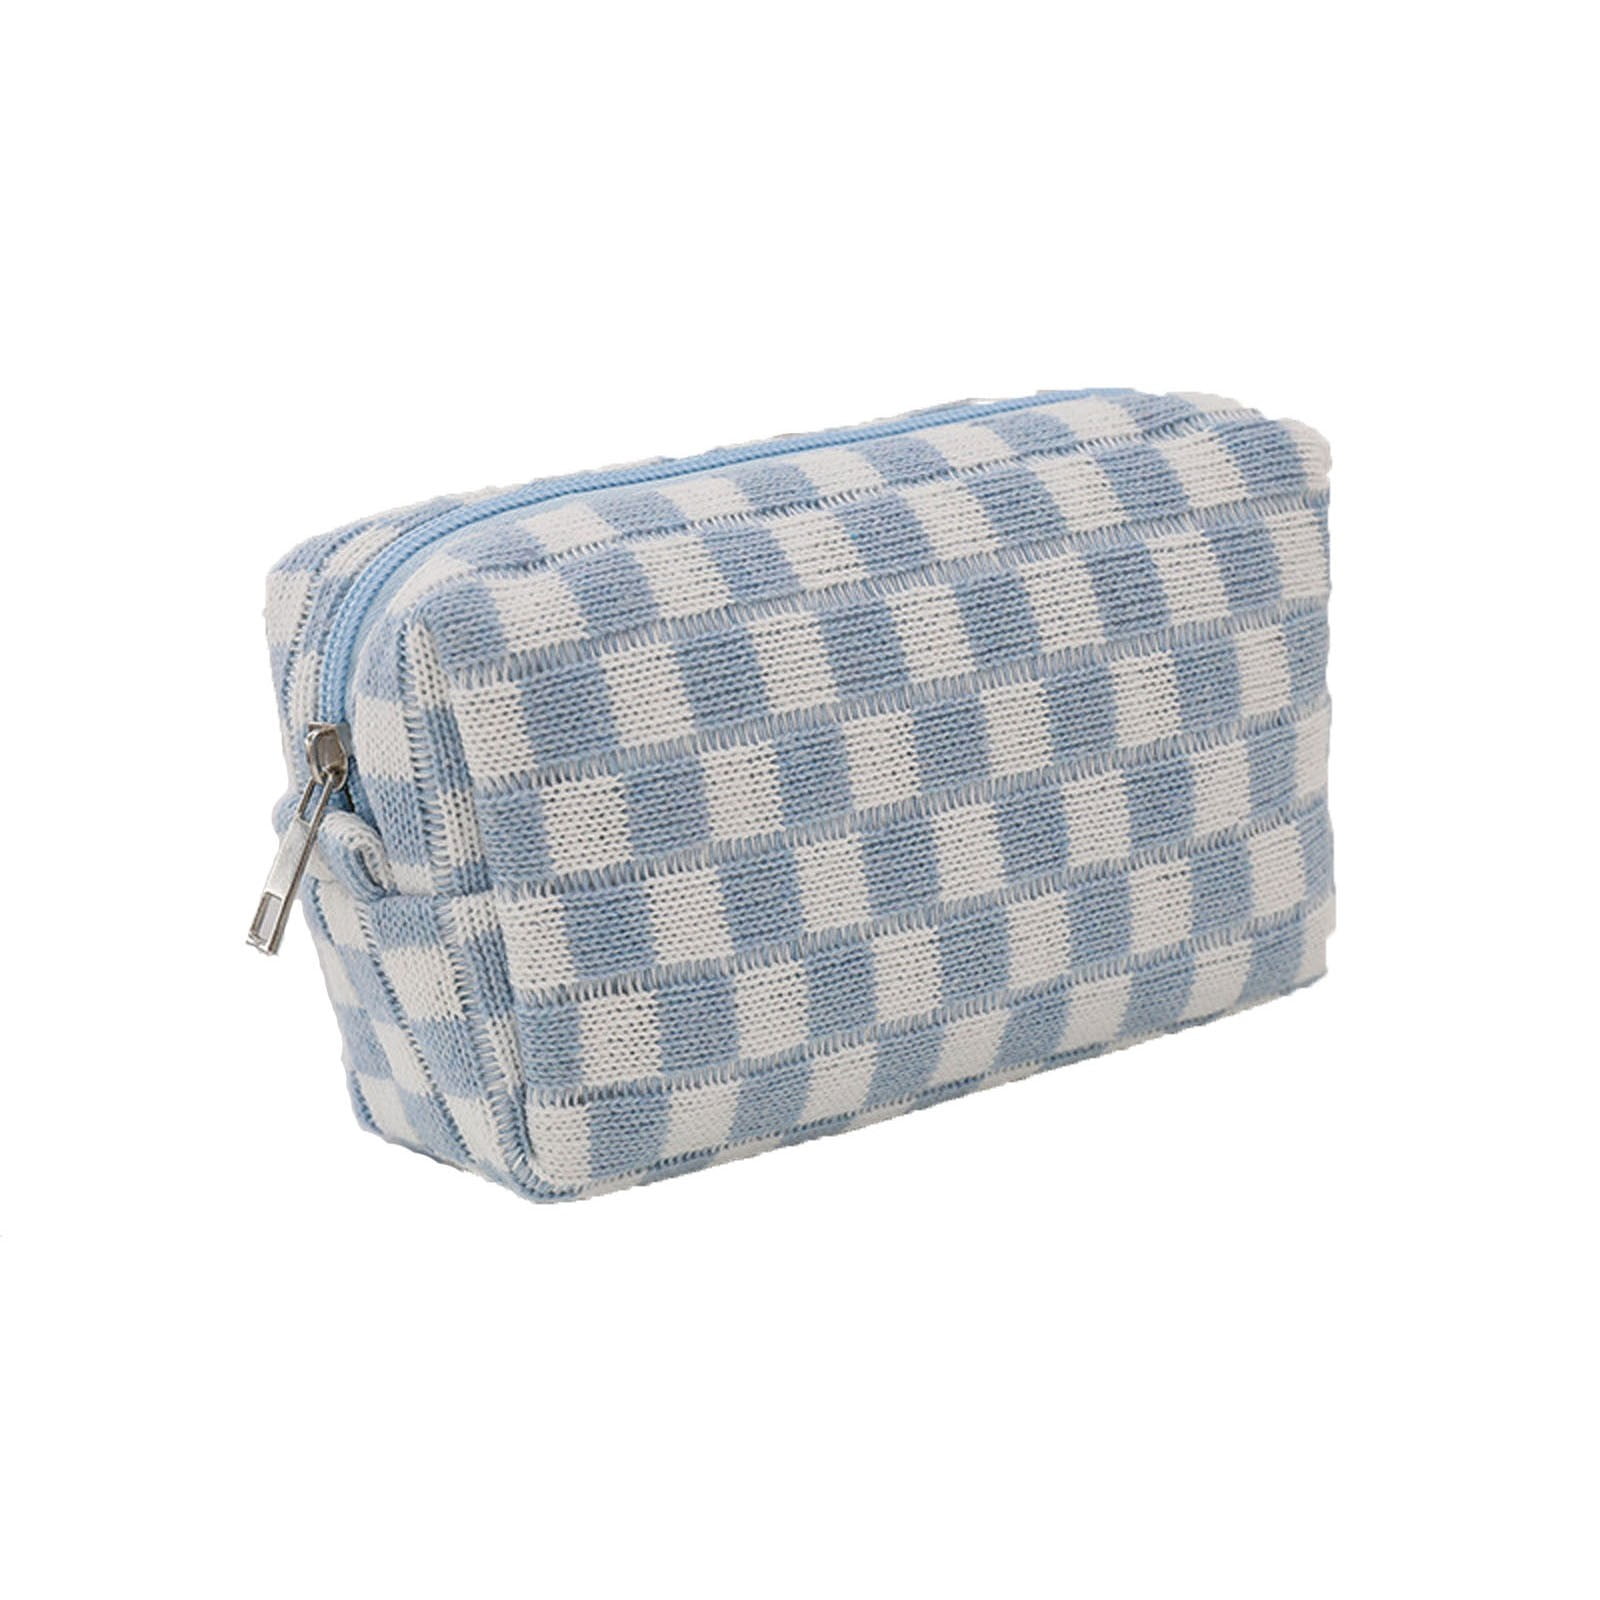 Cessfle Large Capacity Travel Cosmetic Bag Plaid Checkered Makeup Bag Portable Leather Waterproof Skincare Bag with Handle and Divider for Women